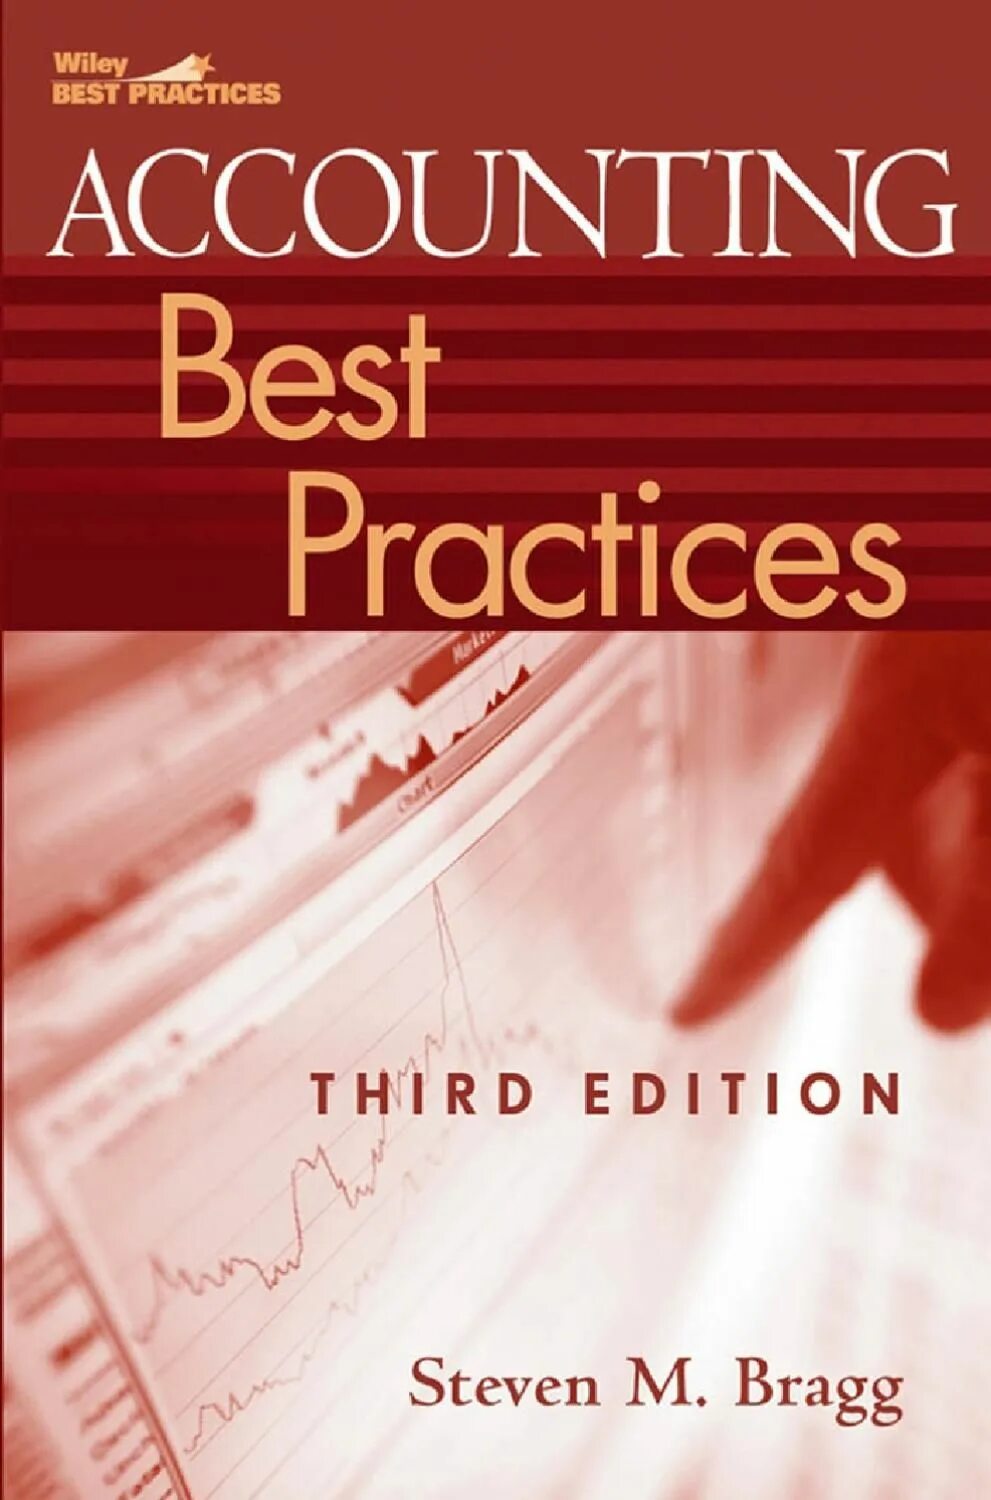 Accounting book. Accounting best Practices. Accounting best Practices book. Financial Accounting book Cover. Zoho book Accounting.